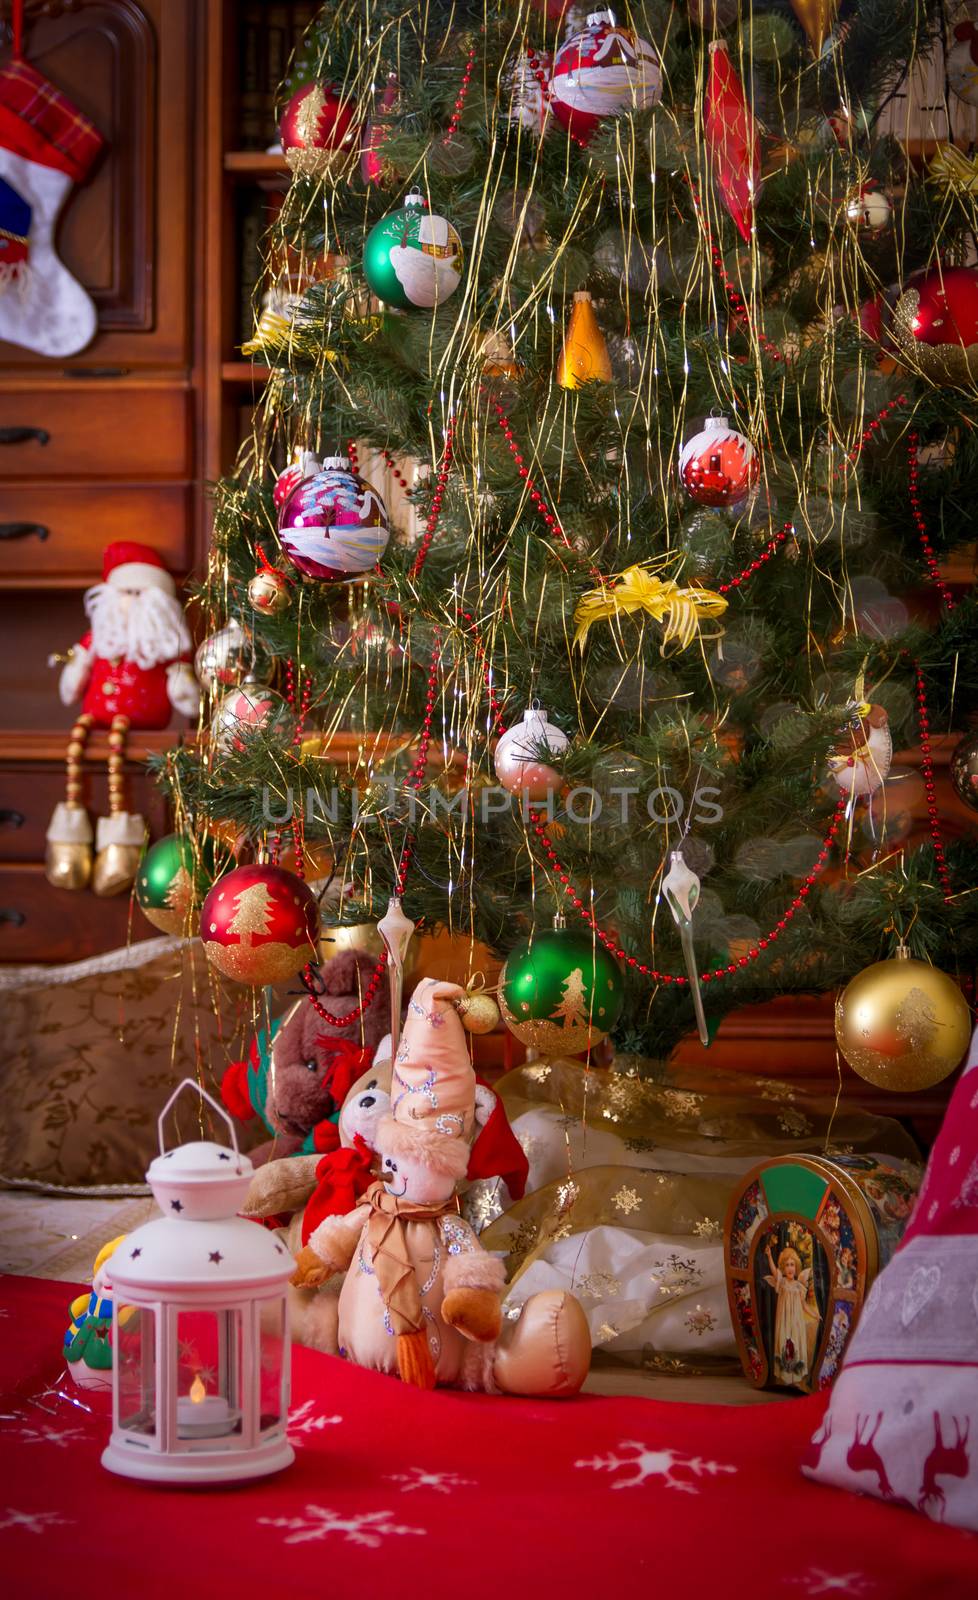 Classic Christmas tree in room vintage interior